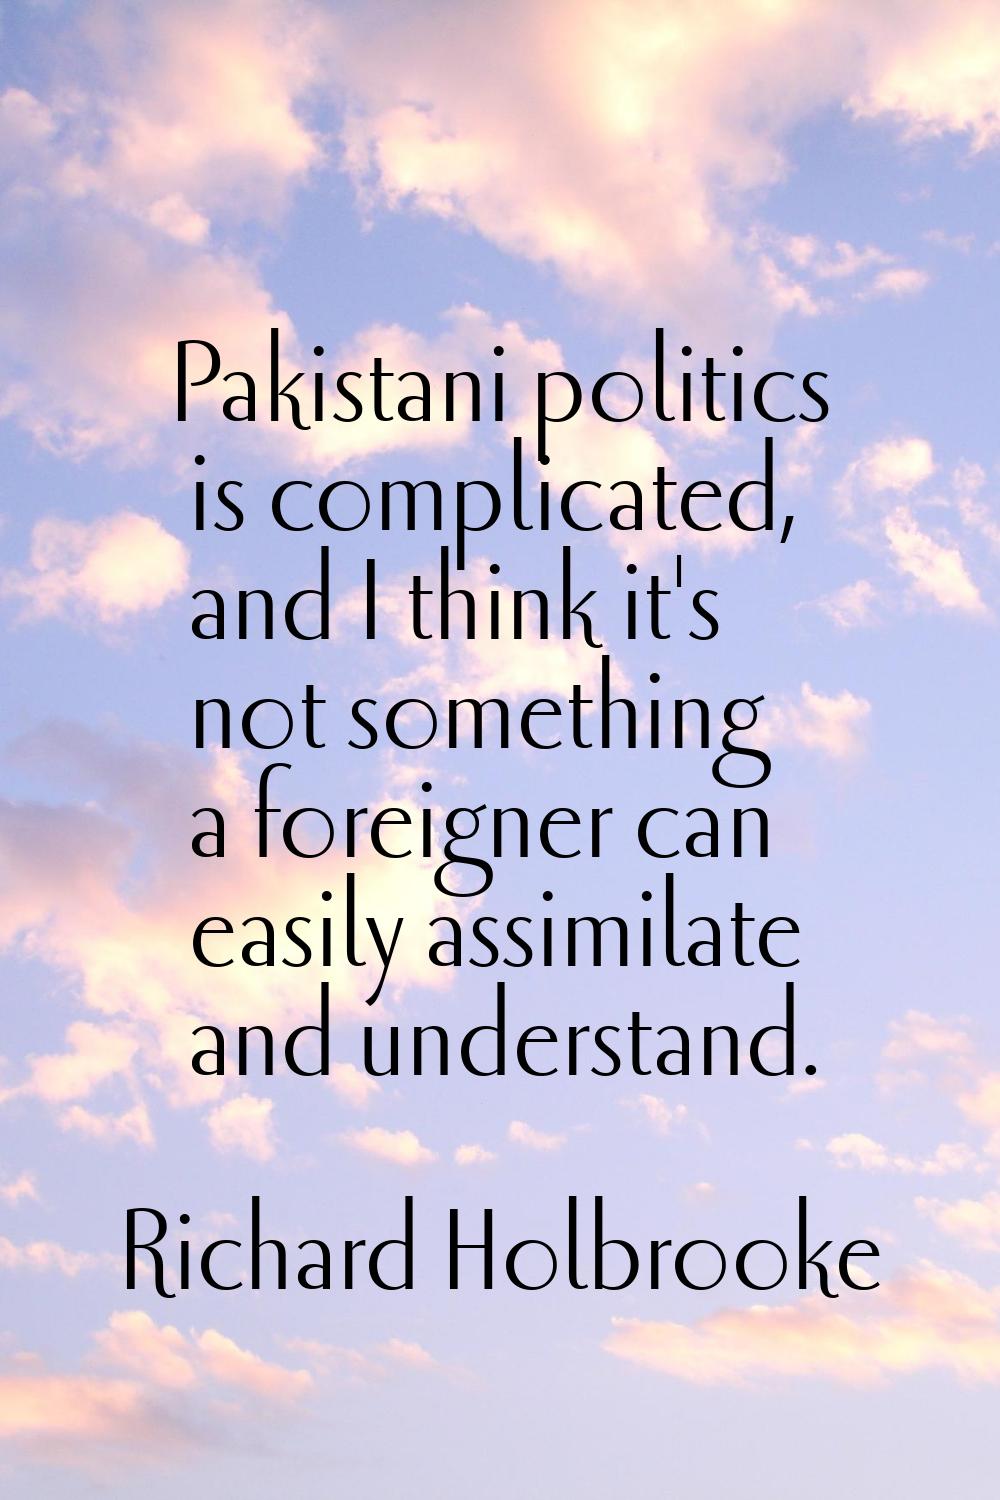 Pakistani politics is complicated, and I think it's not something a foreigner can easily assimilate